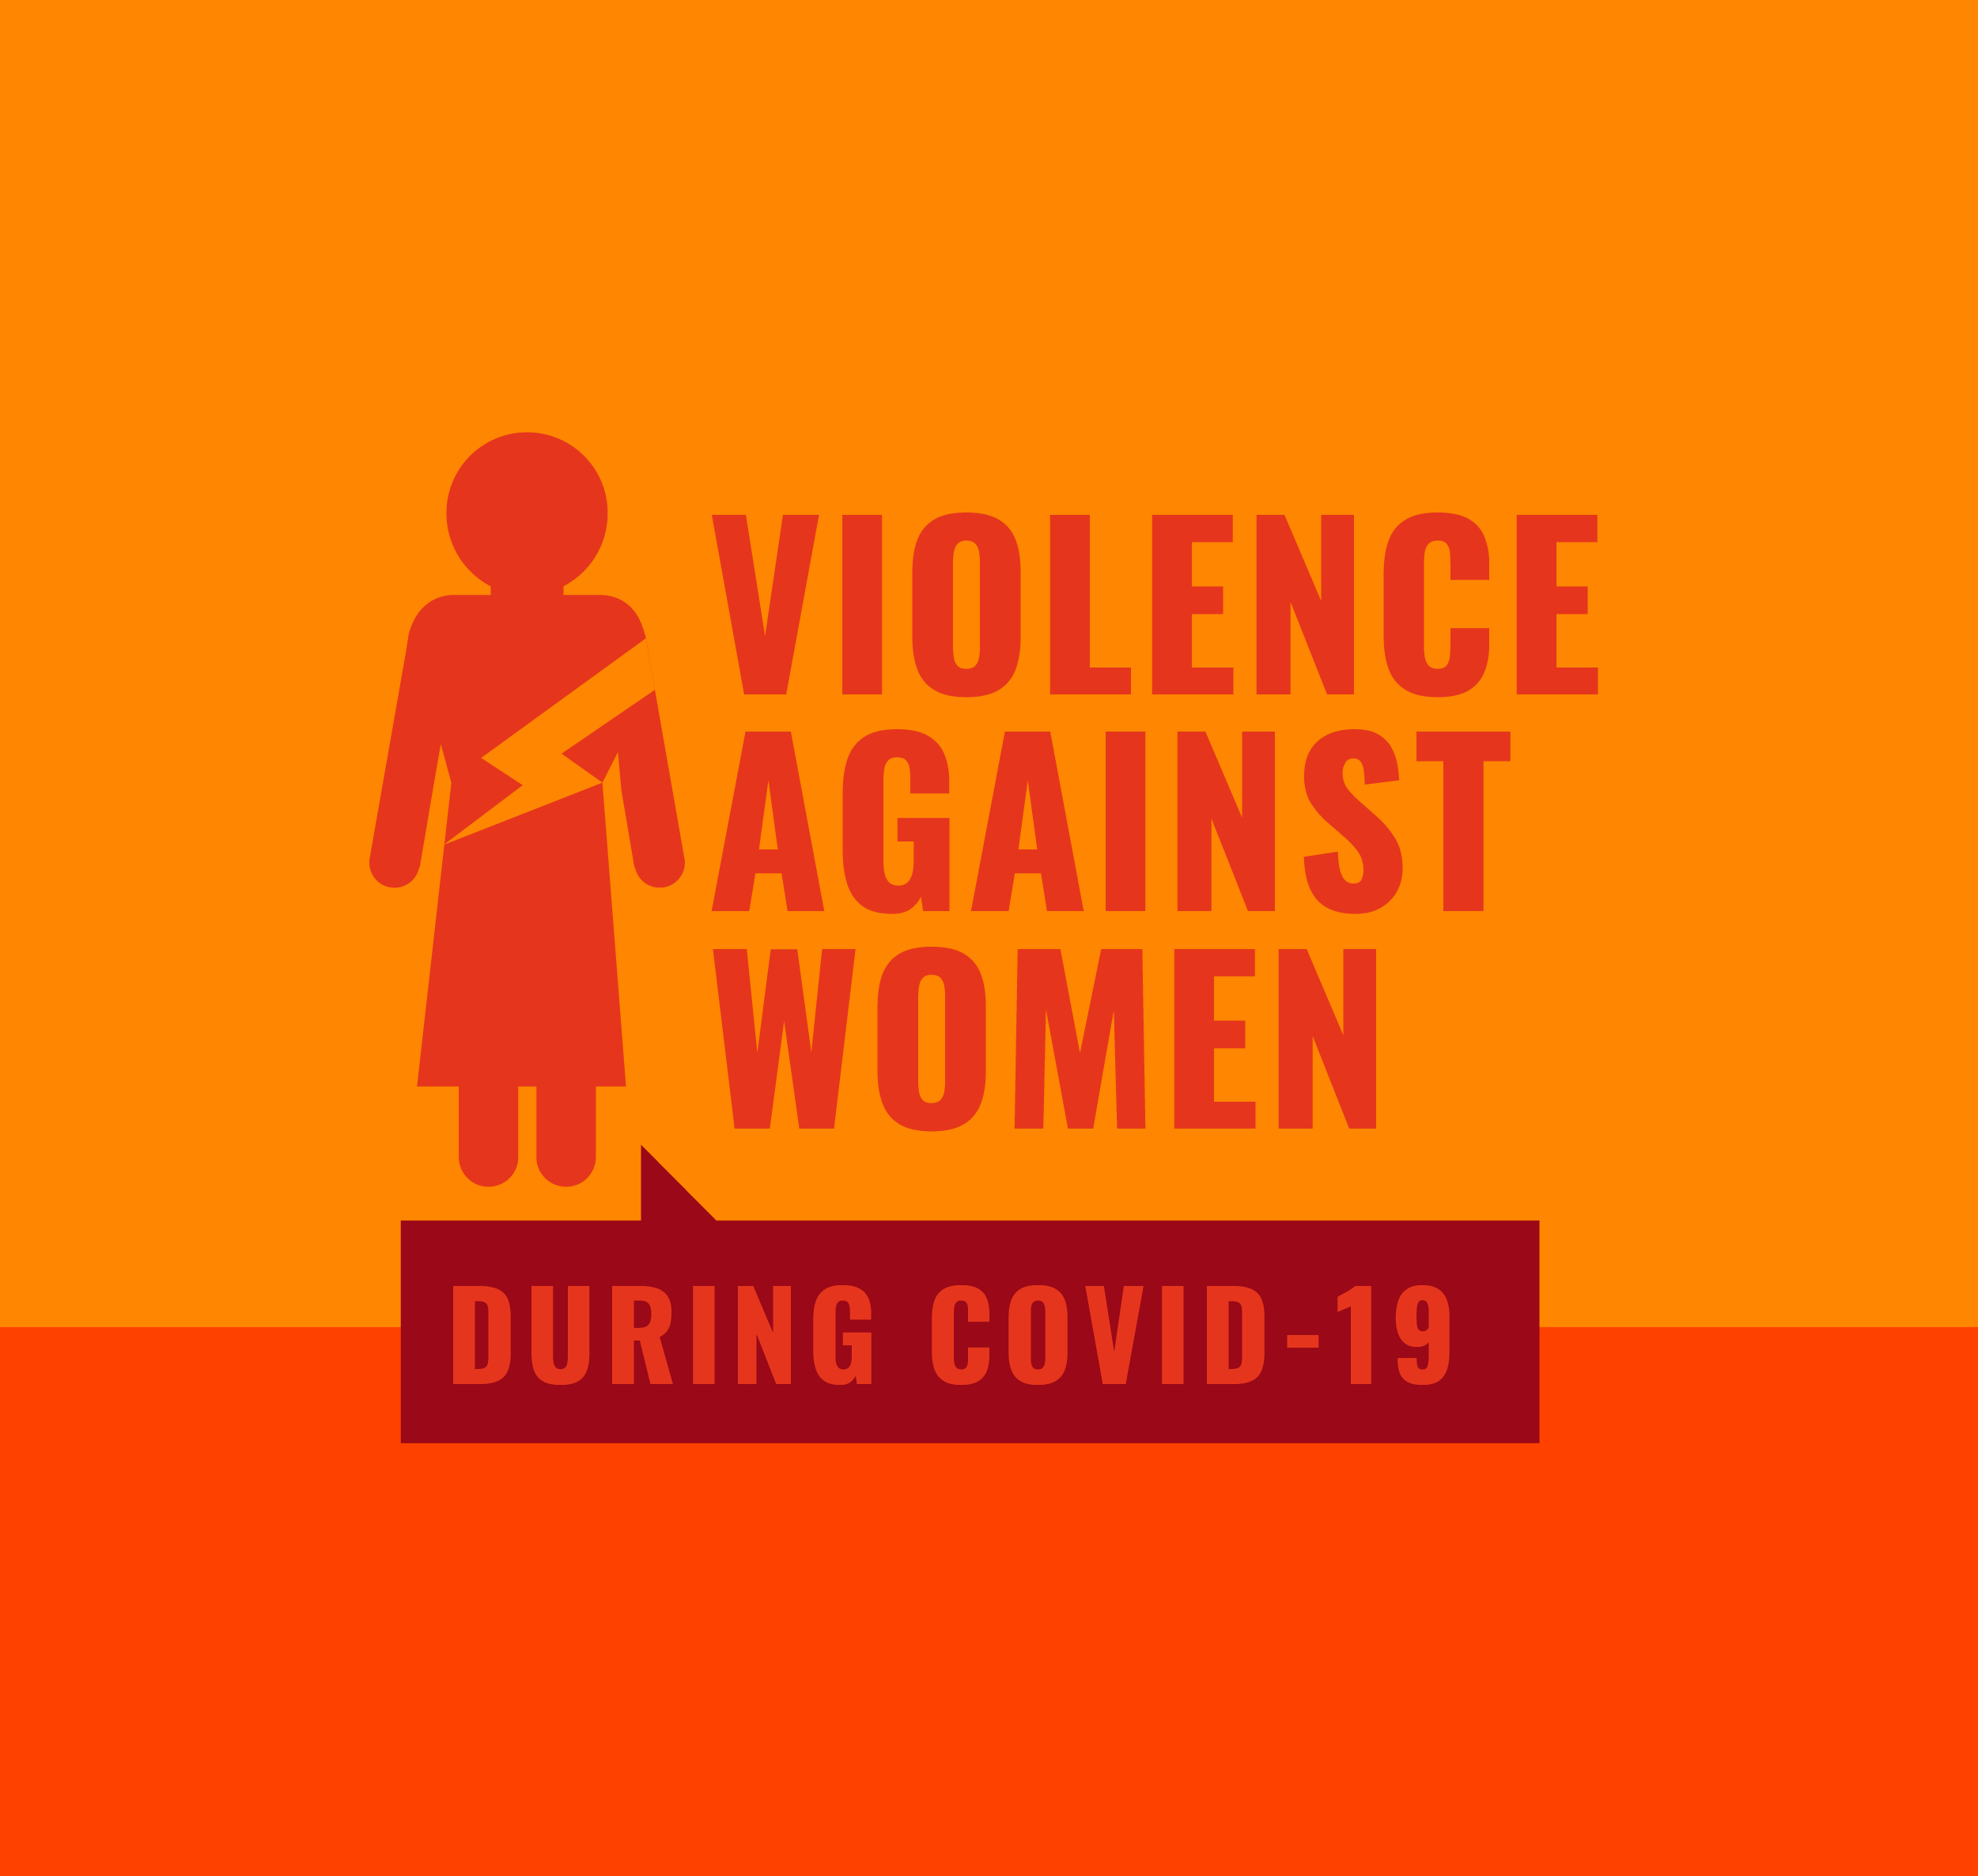 data on violence against women during COVID-19 